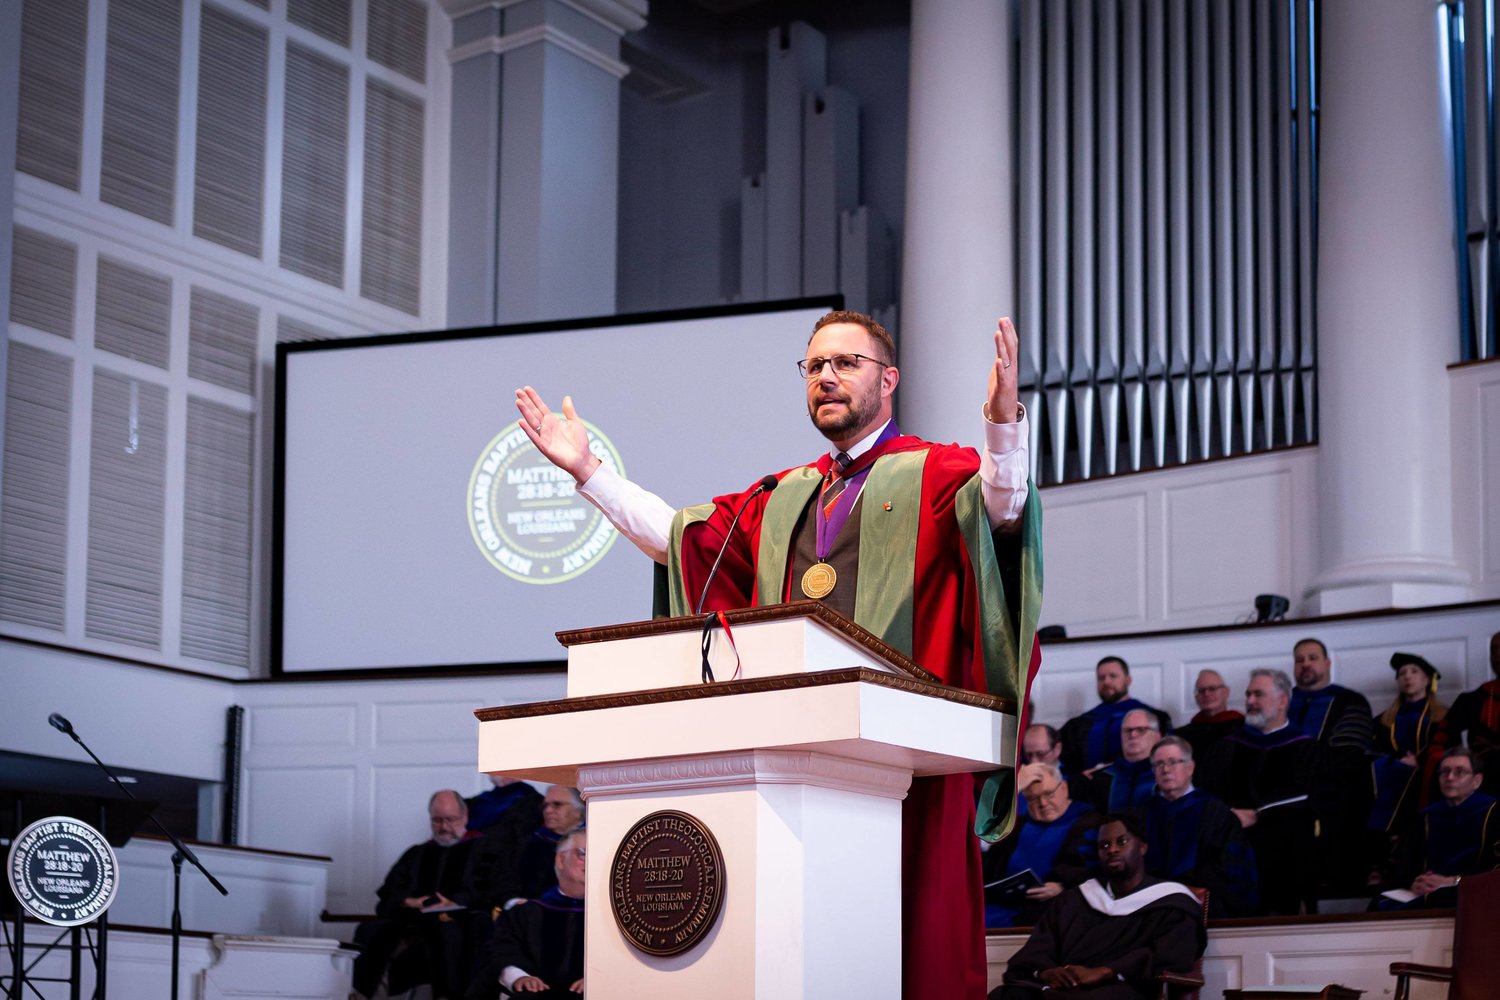 Jamie Dew, president of New Orleans Baptist Theological Seminary and Leavell College, addresses graduates in New Orleans at the school's May 2022 commencement. (Photo/Madelynn Duke)